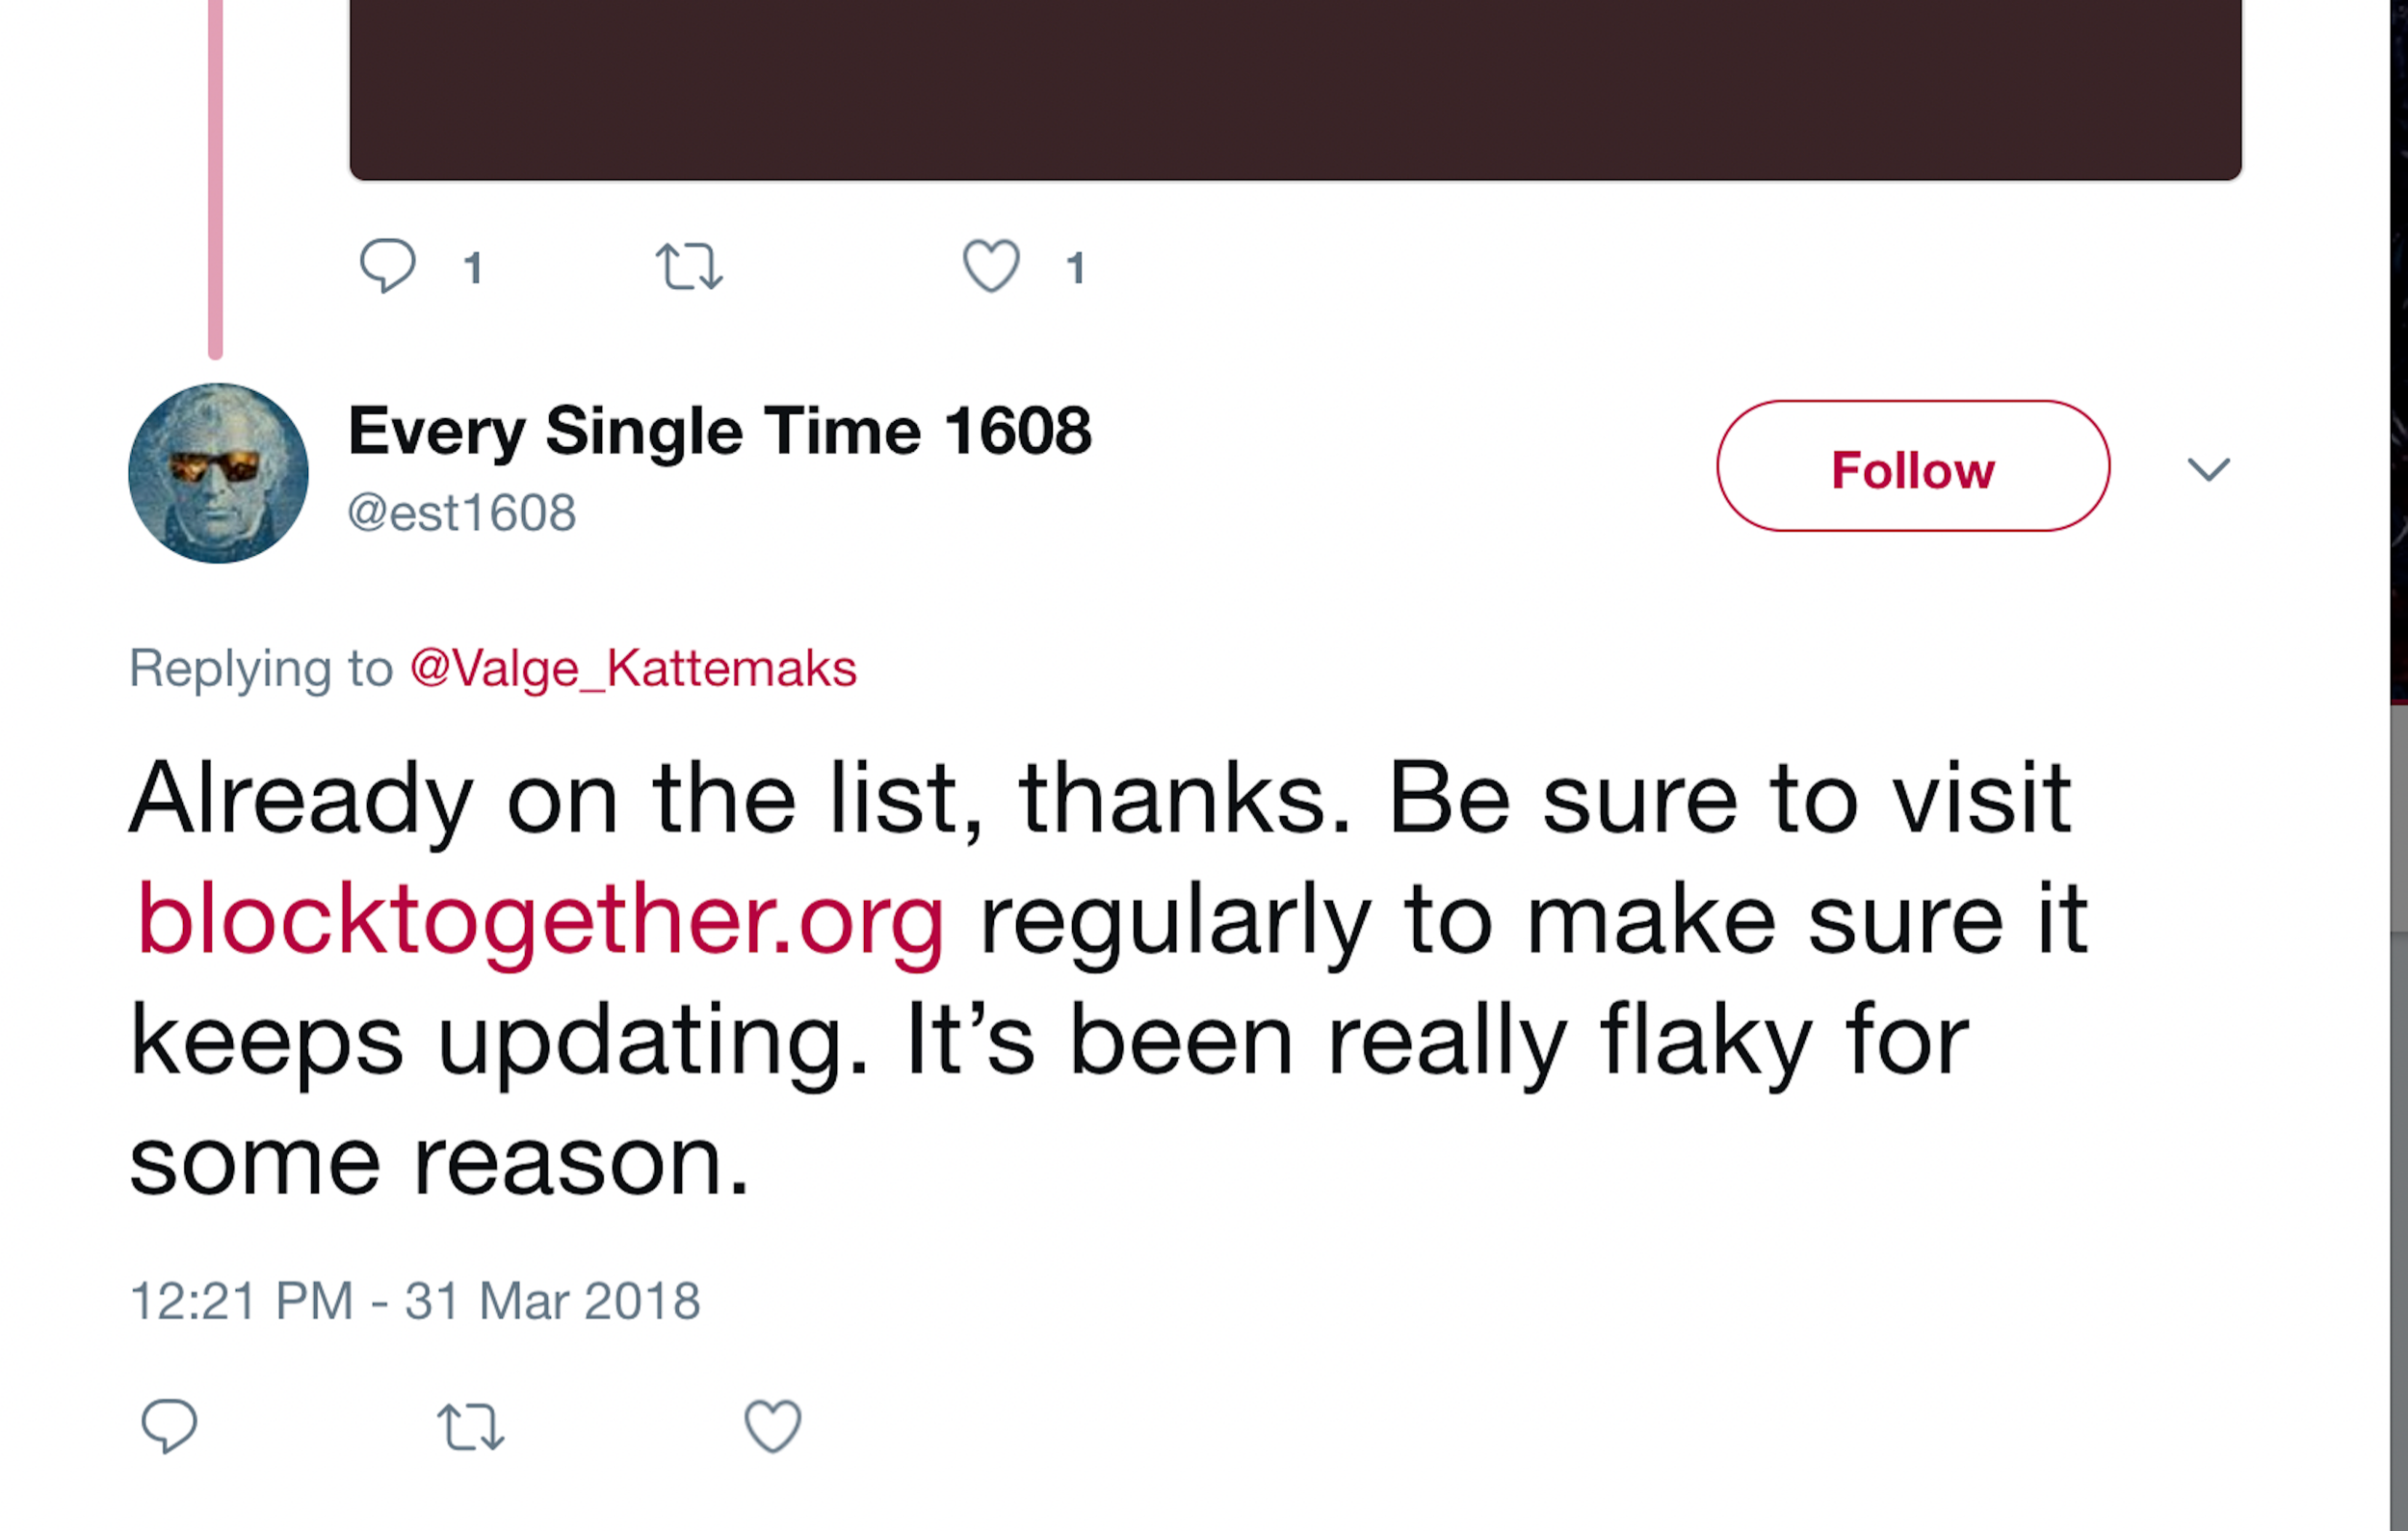 Woe tweet advertising his blocktogether list, saying people should "visit regularly to make sure it keeps updating" because "it's been really flaky for some reason."